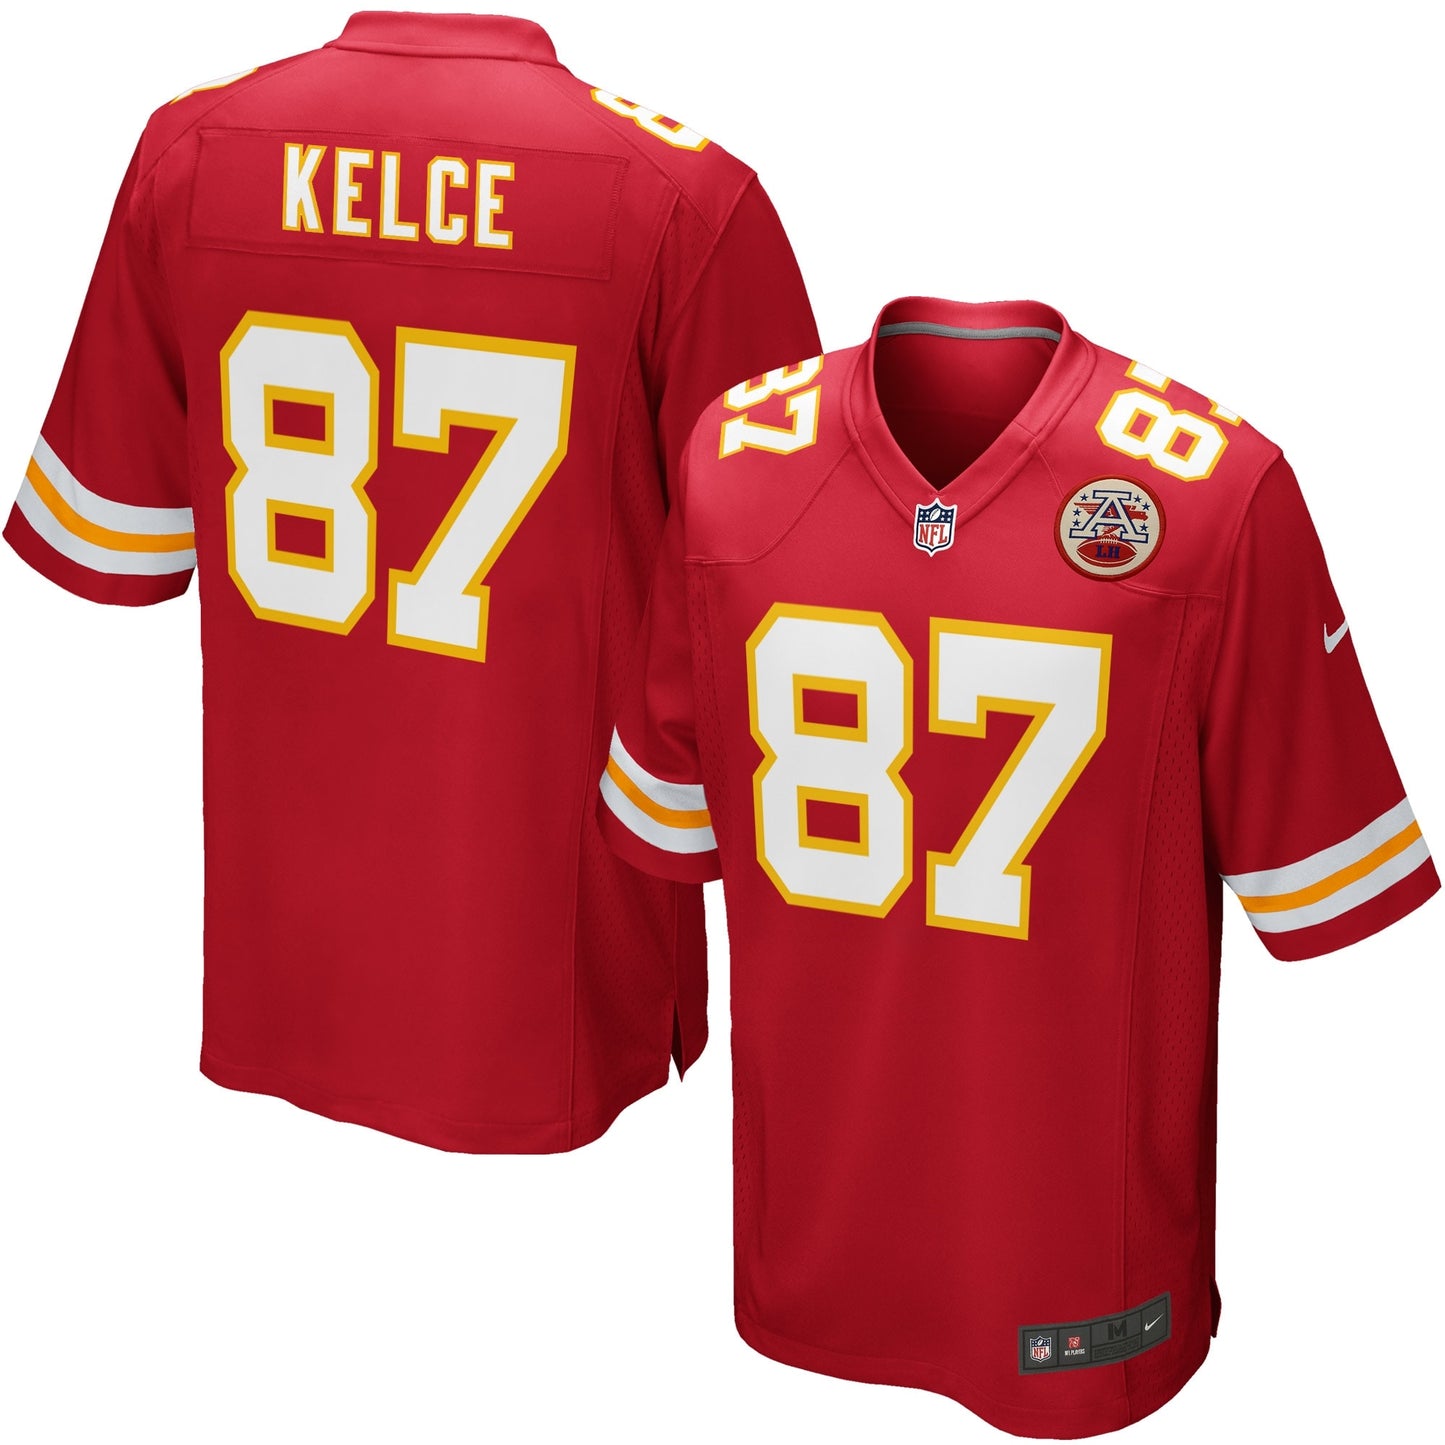 Travis Kelce Kansas City Chiefs Nike Youth Game Jersey - Red